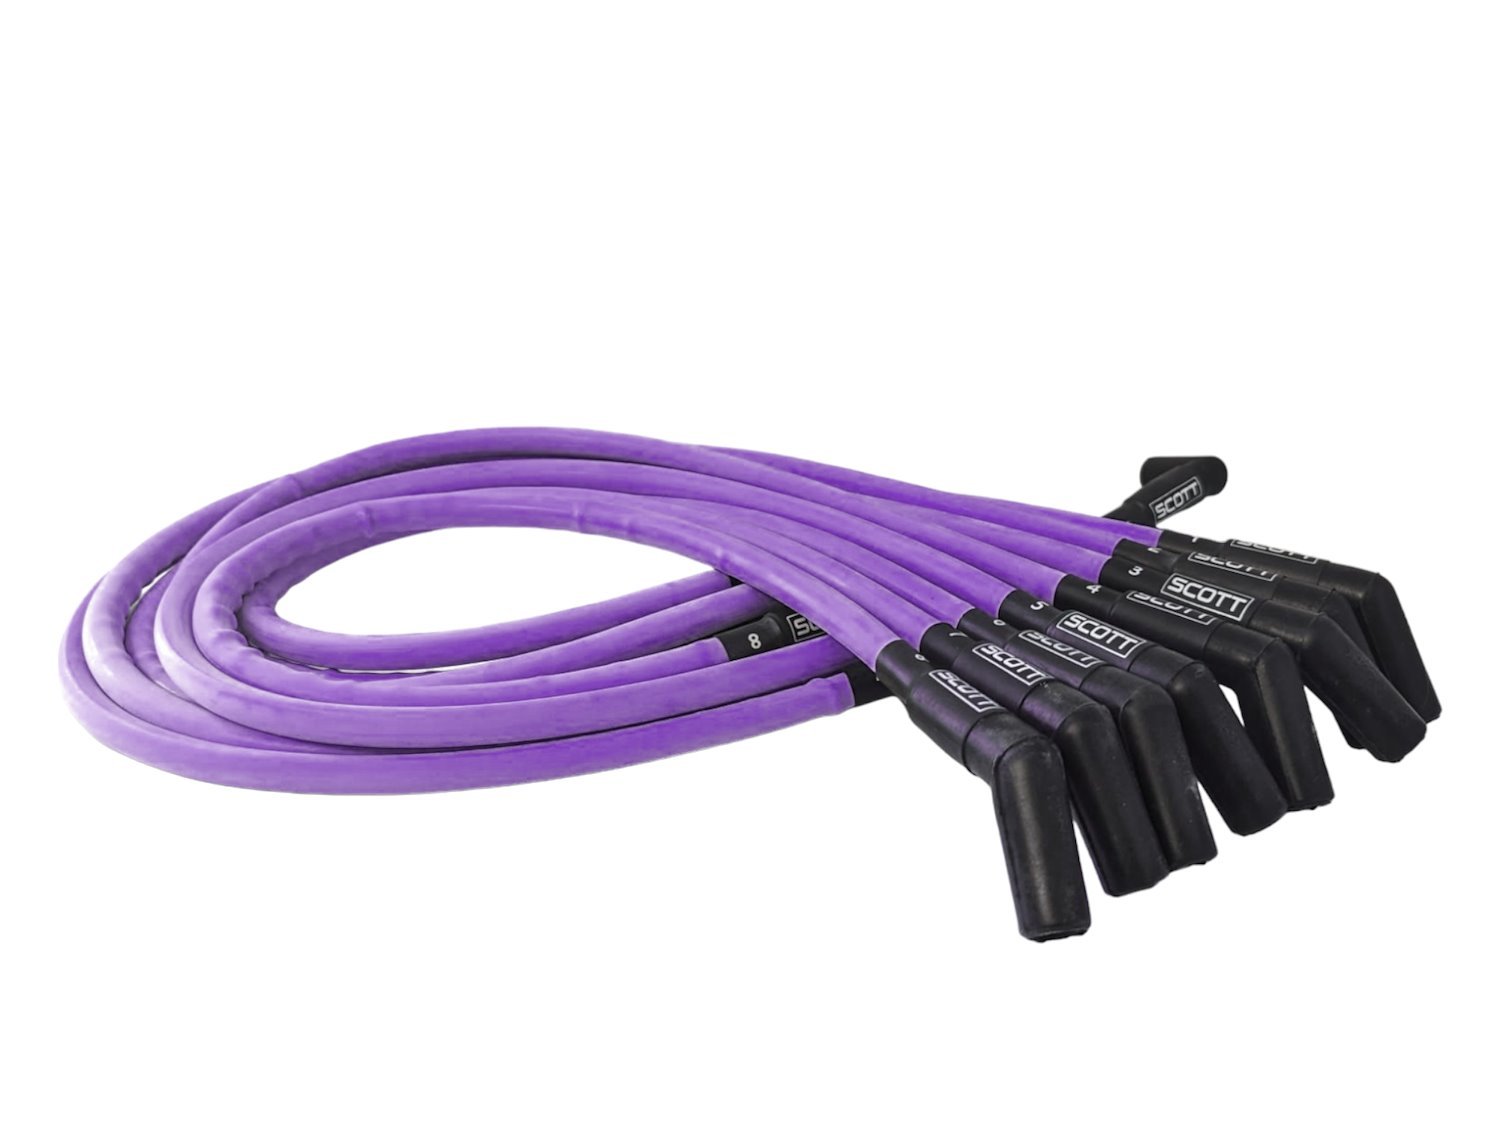 SPW-CH-426-6 High-Performance Silicone-Sleeved Spark Plug Wire Set for Small Block Ford, Over Valve Cover [Purple]